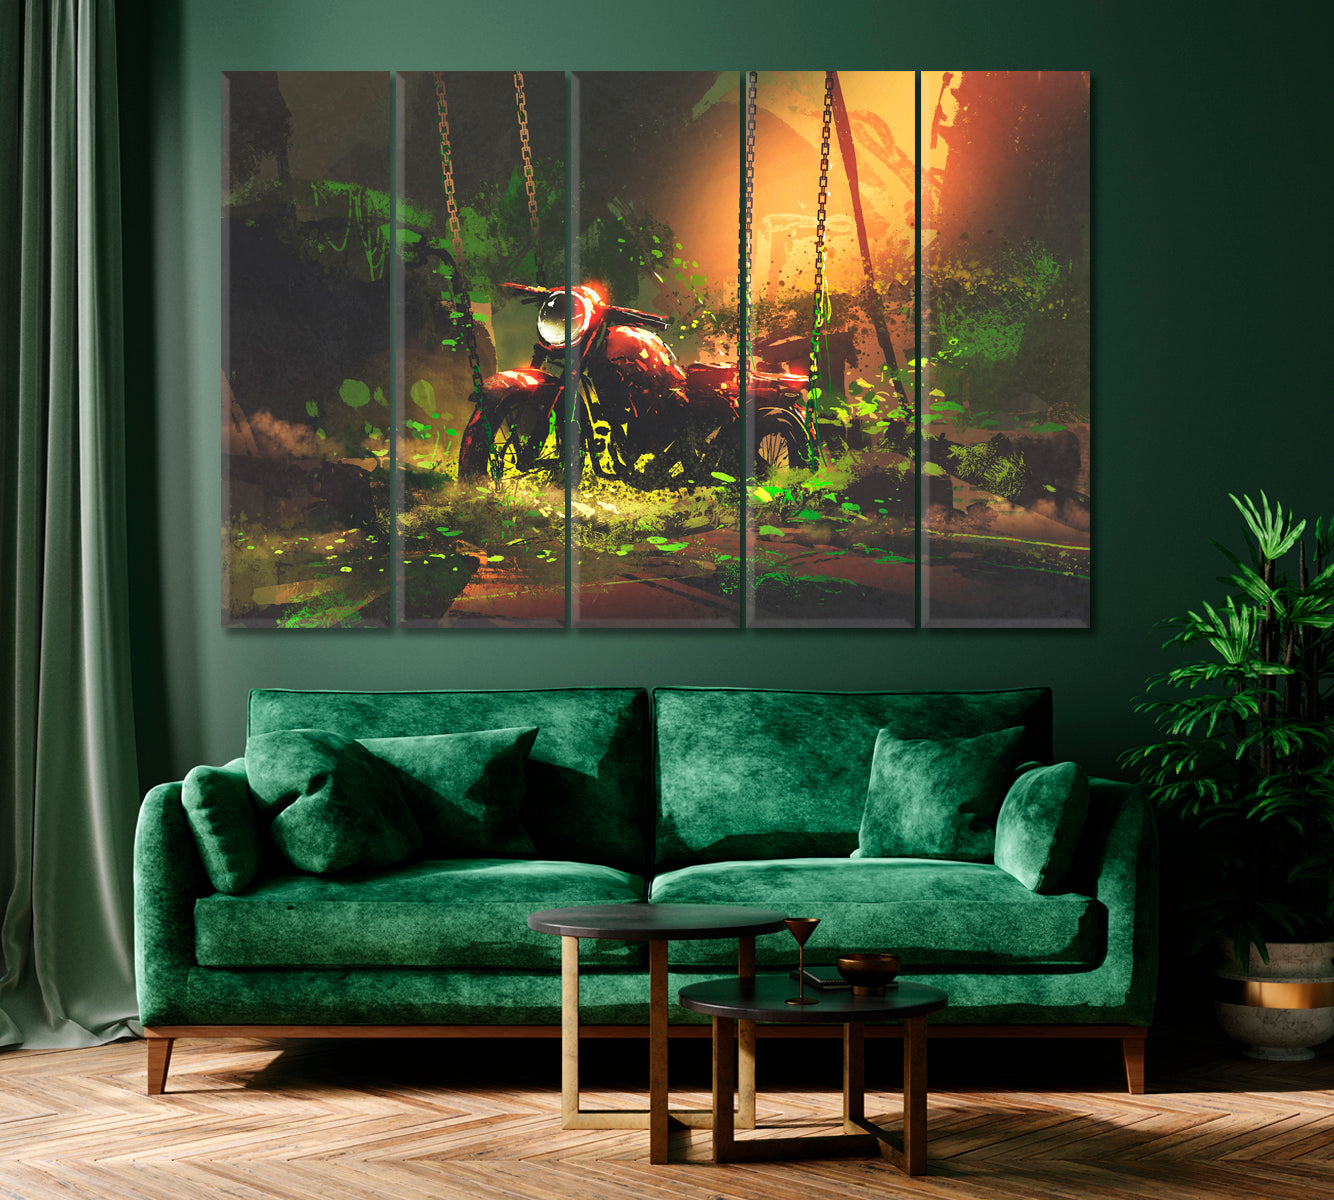 Abandoned Motorcycle Canvas Print ArtLexy 5 Panels 36"x24" inches 